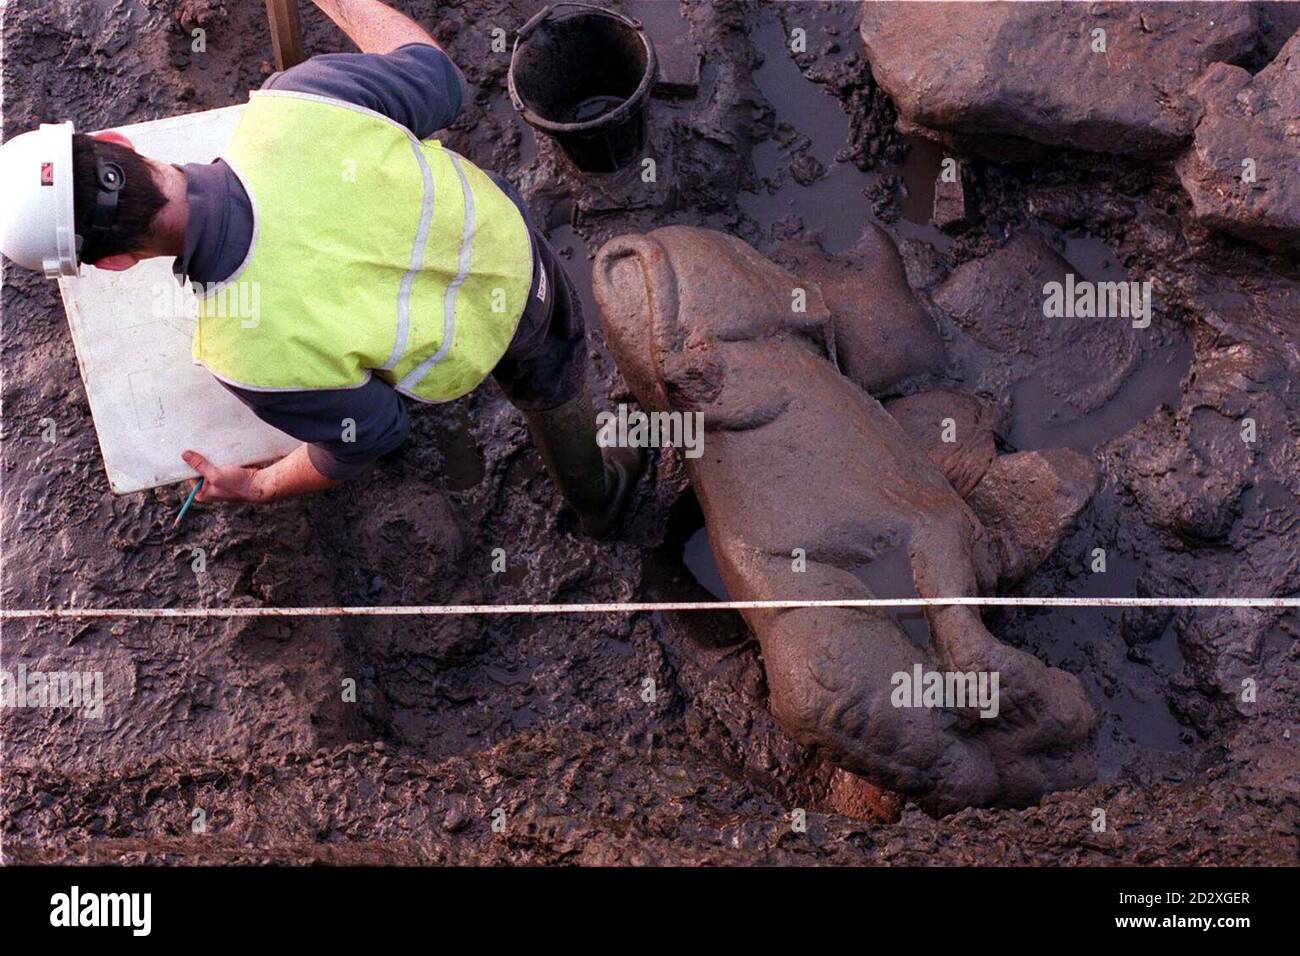 The 5ft sandstone sculpture of a lioness devouring a man, one of Britain's finest Roman relics, after it was today (Monday) released from the mud which has encased and protected it for around 1,800 years, on the banks of the River Almond at Cramond, near Edinburgh. See PA Story SOCIAL Roman. Stock Photo